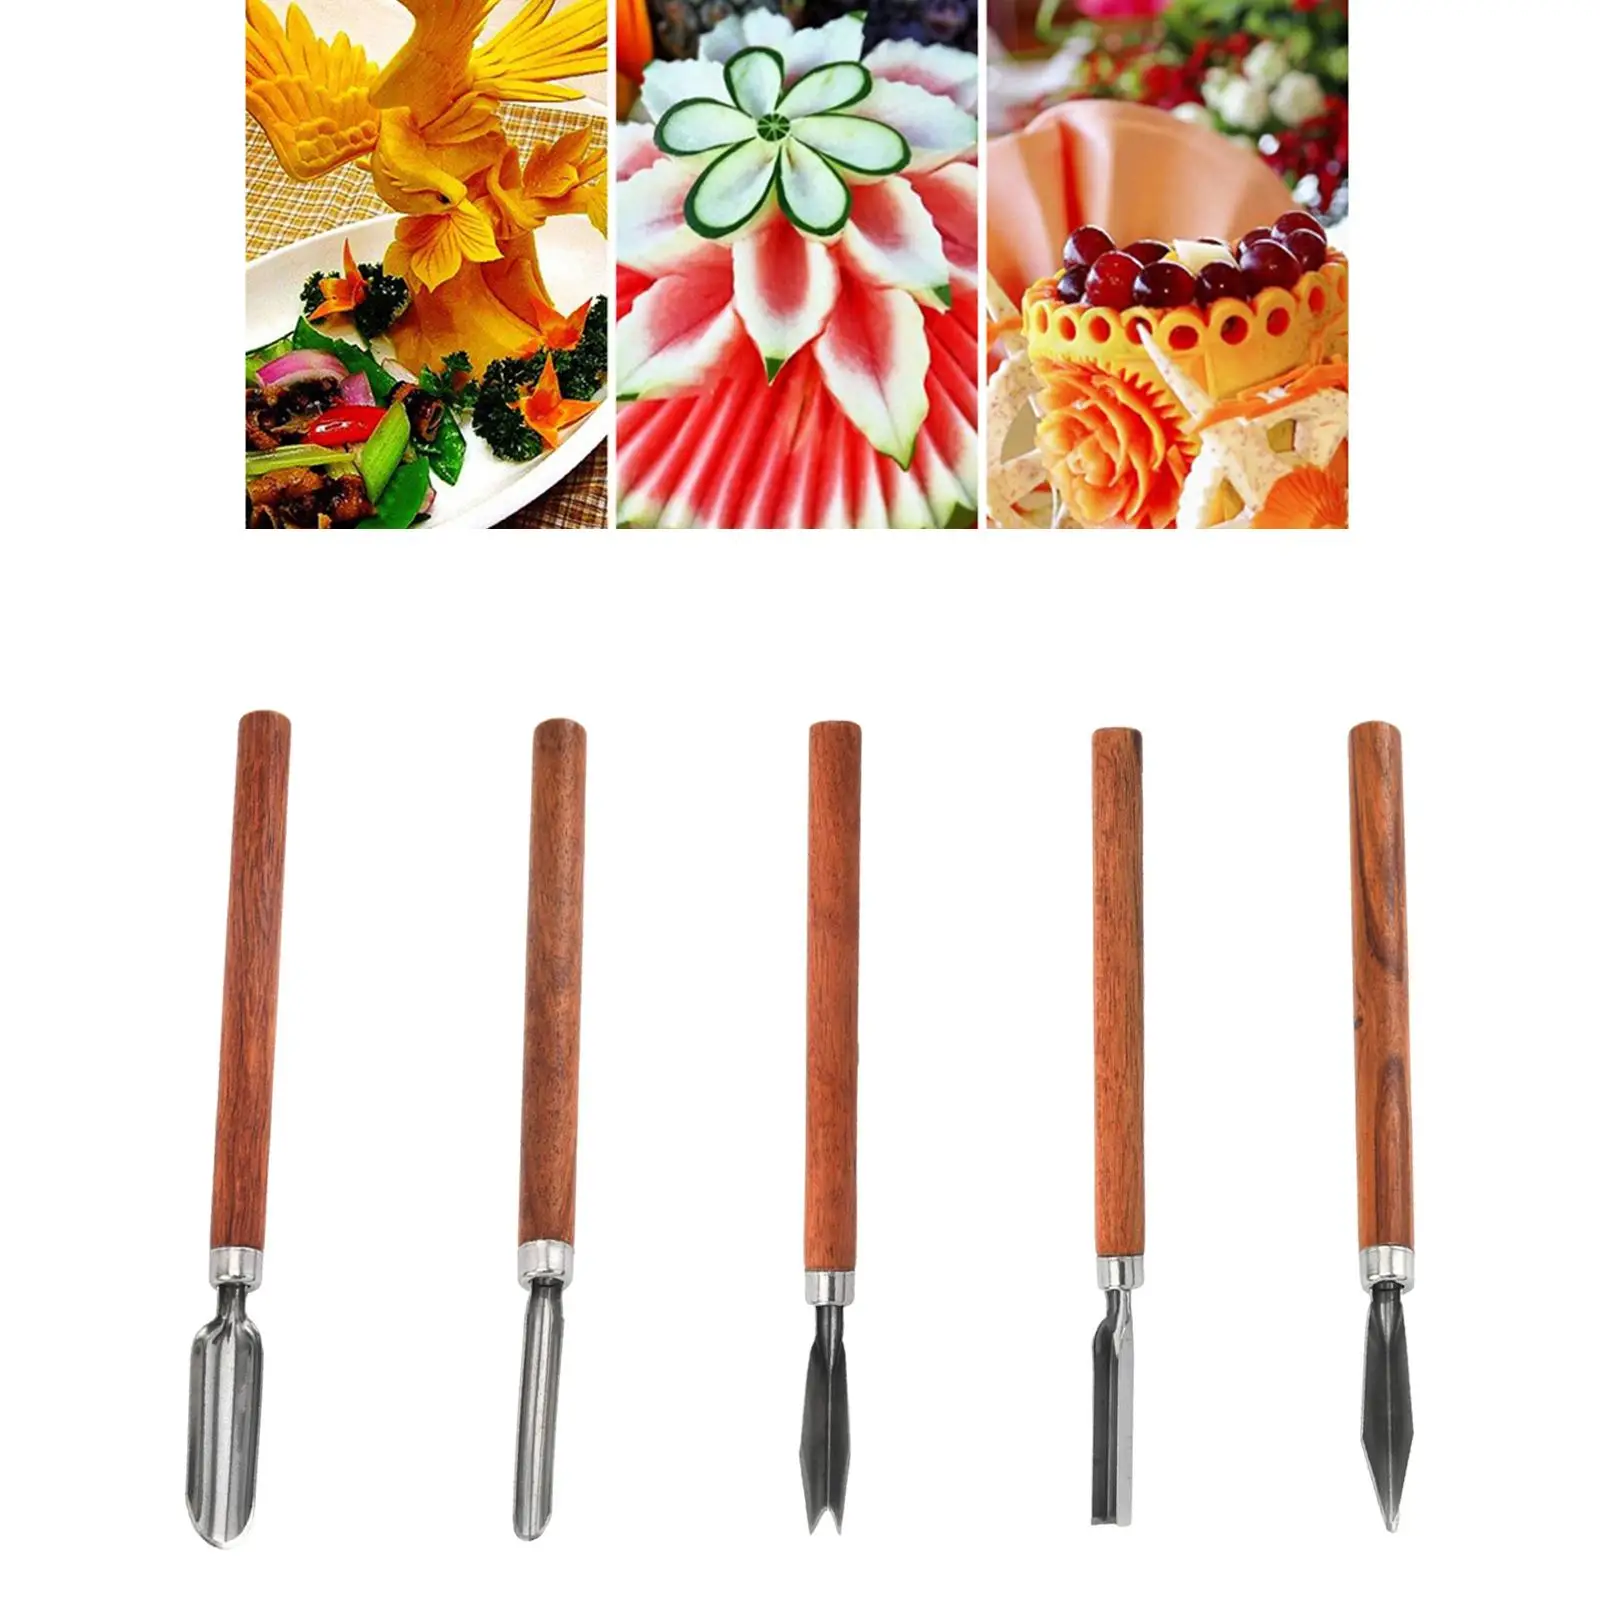 Portable Carving Knife Stainless Steel Vegetable Fruit Slicing Cutting Food Engraving Sculpting